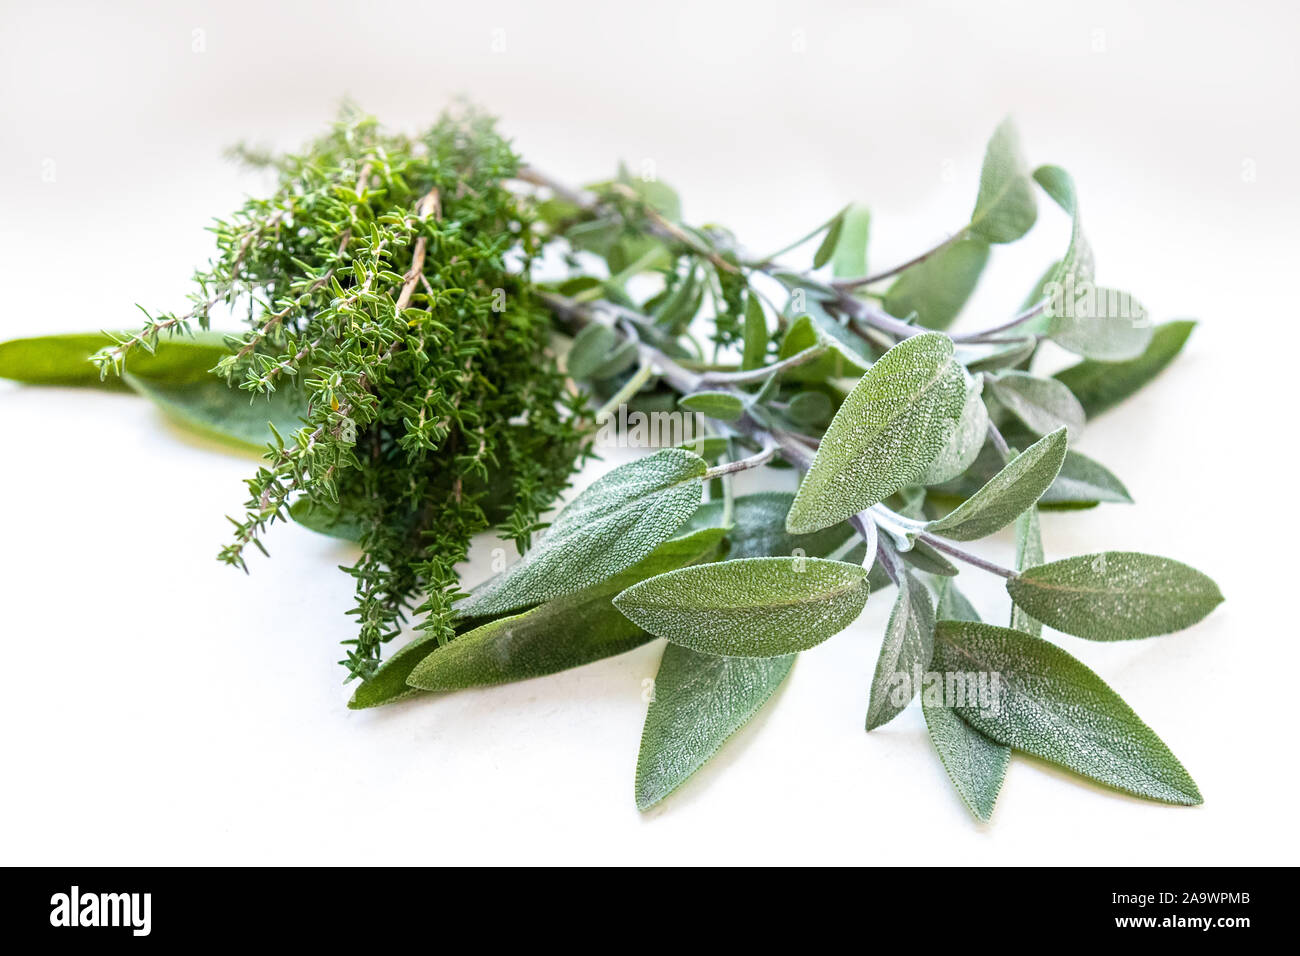 https://c8.alamy.com/comp/2A9WPMB/sage-and-thyme-on-a-white-background-herbs-from-the-garden-fresh-spices-taste-in-leaves-aromatic-plants-taste-and-smell-in-green-meat-seasonings-2A9WPMB.jpg